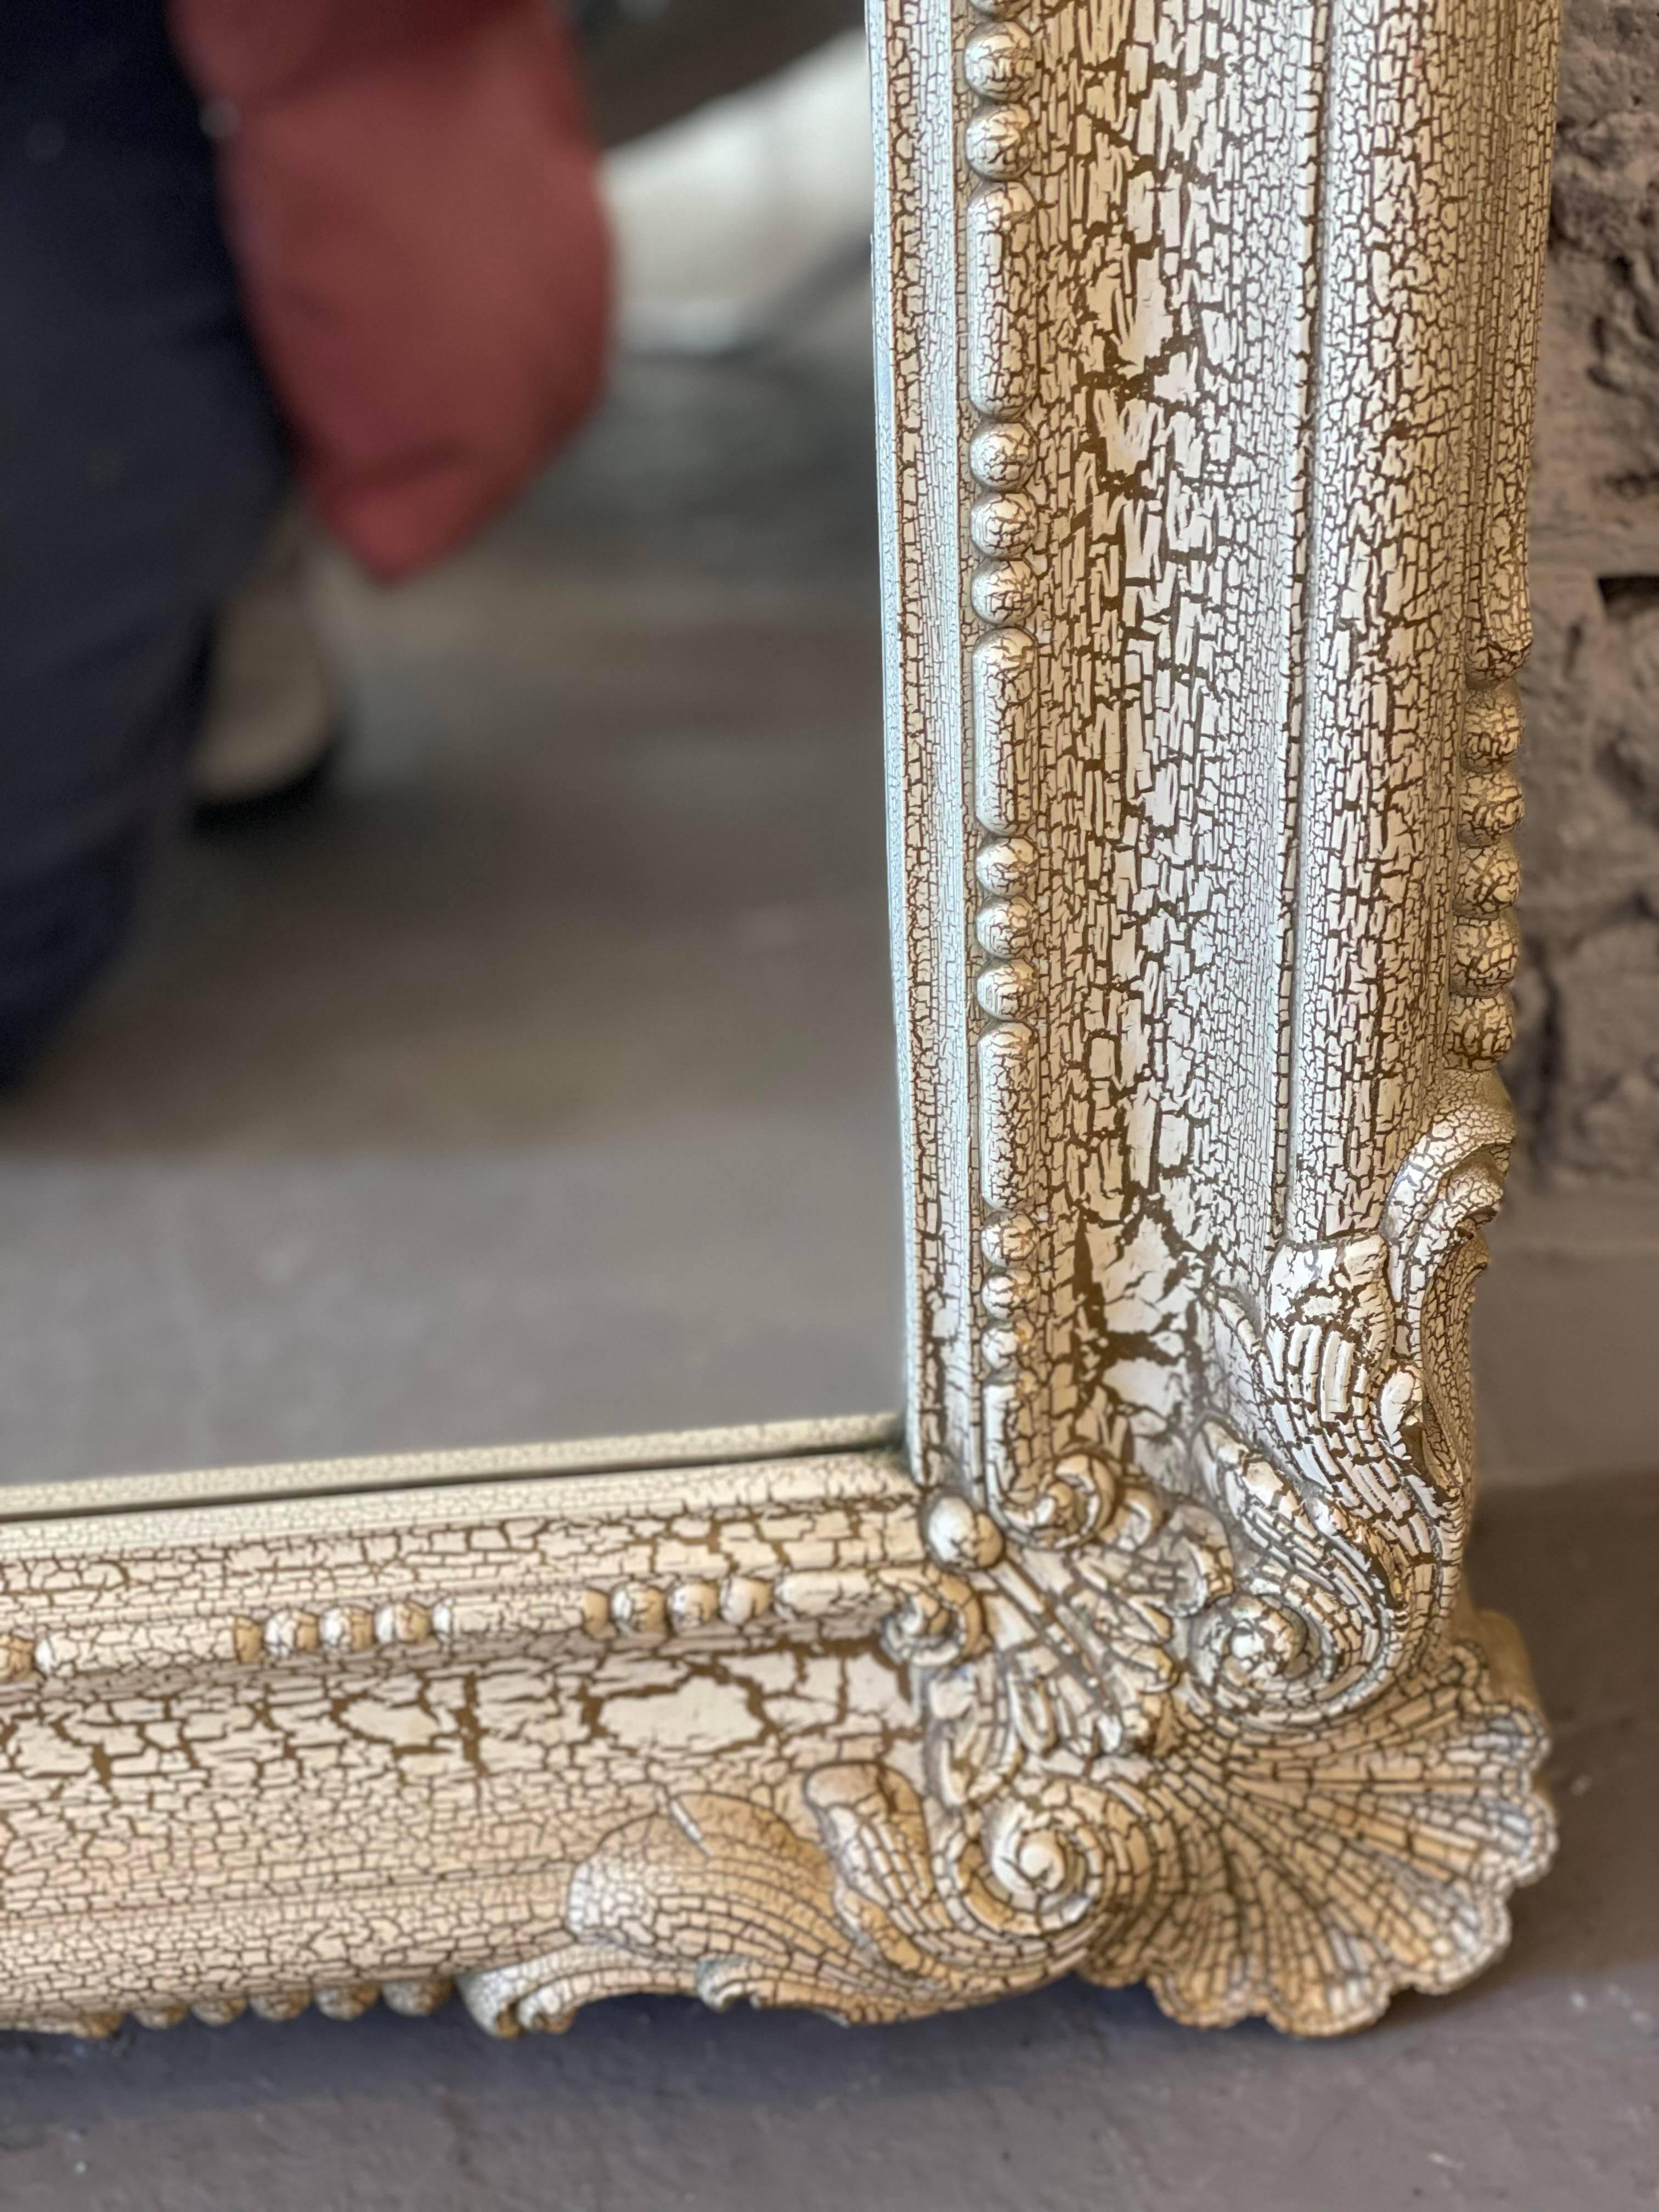 Beautiful painted mirror on resin. In incredible condition.

Dimensions: 30